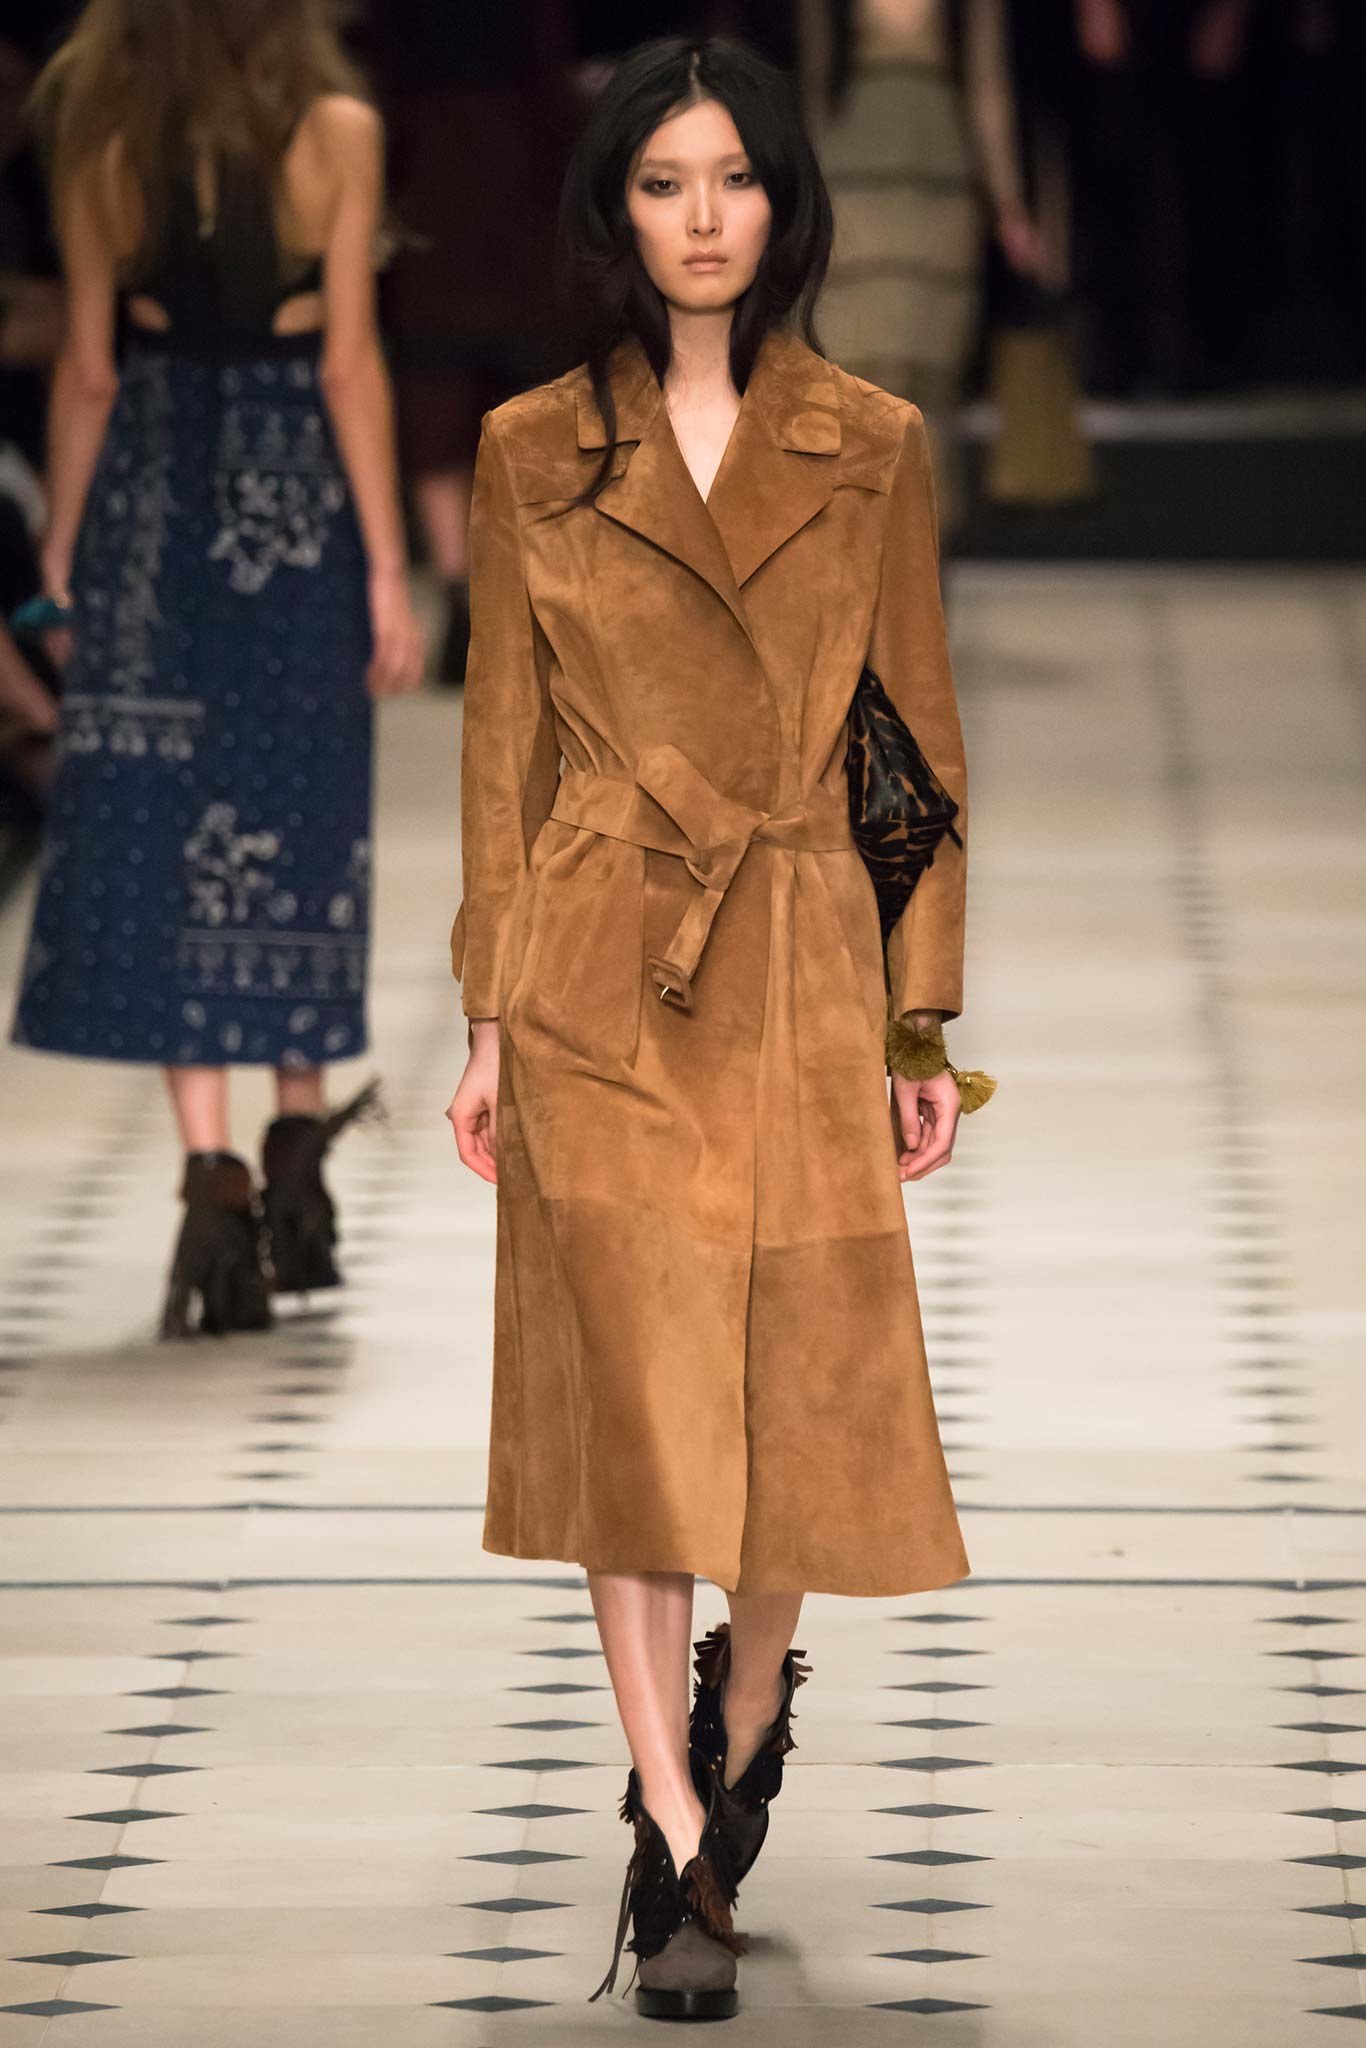 Fall Trends 2015 – Suede